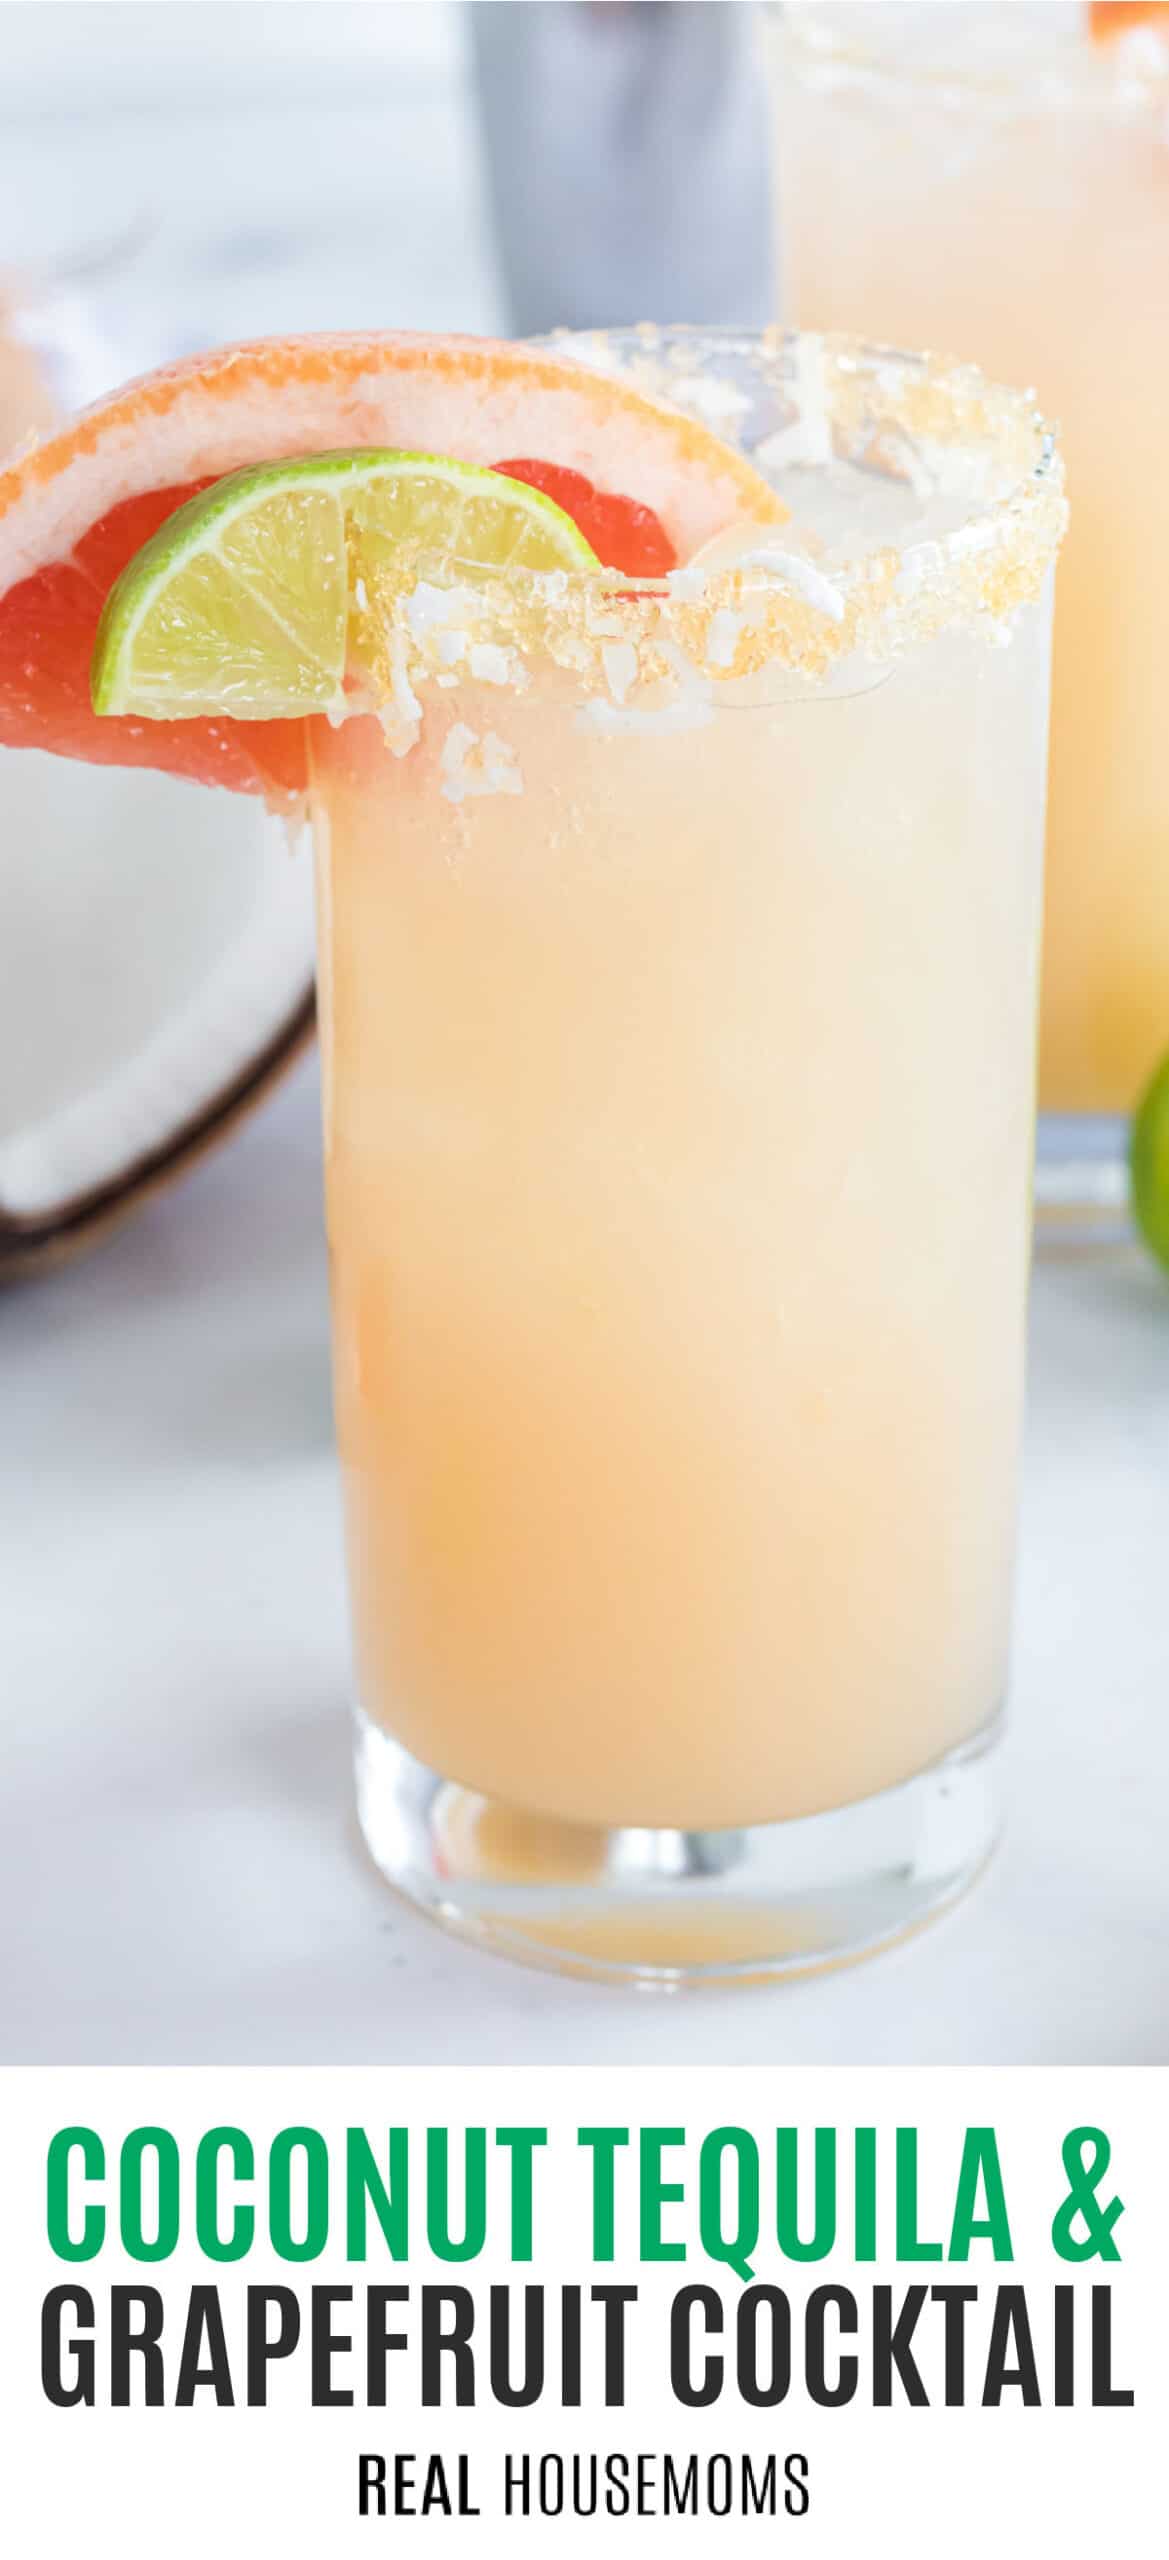 Coconut Tequila and Grapefruit Cocktail